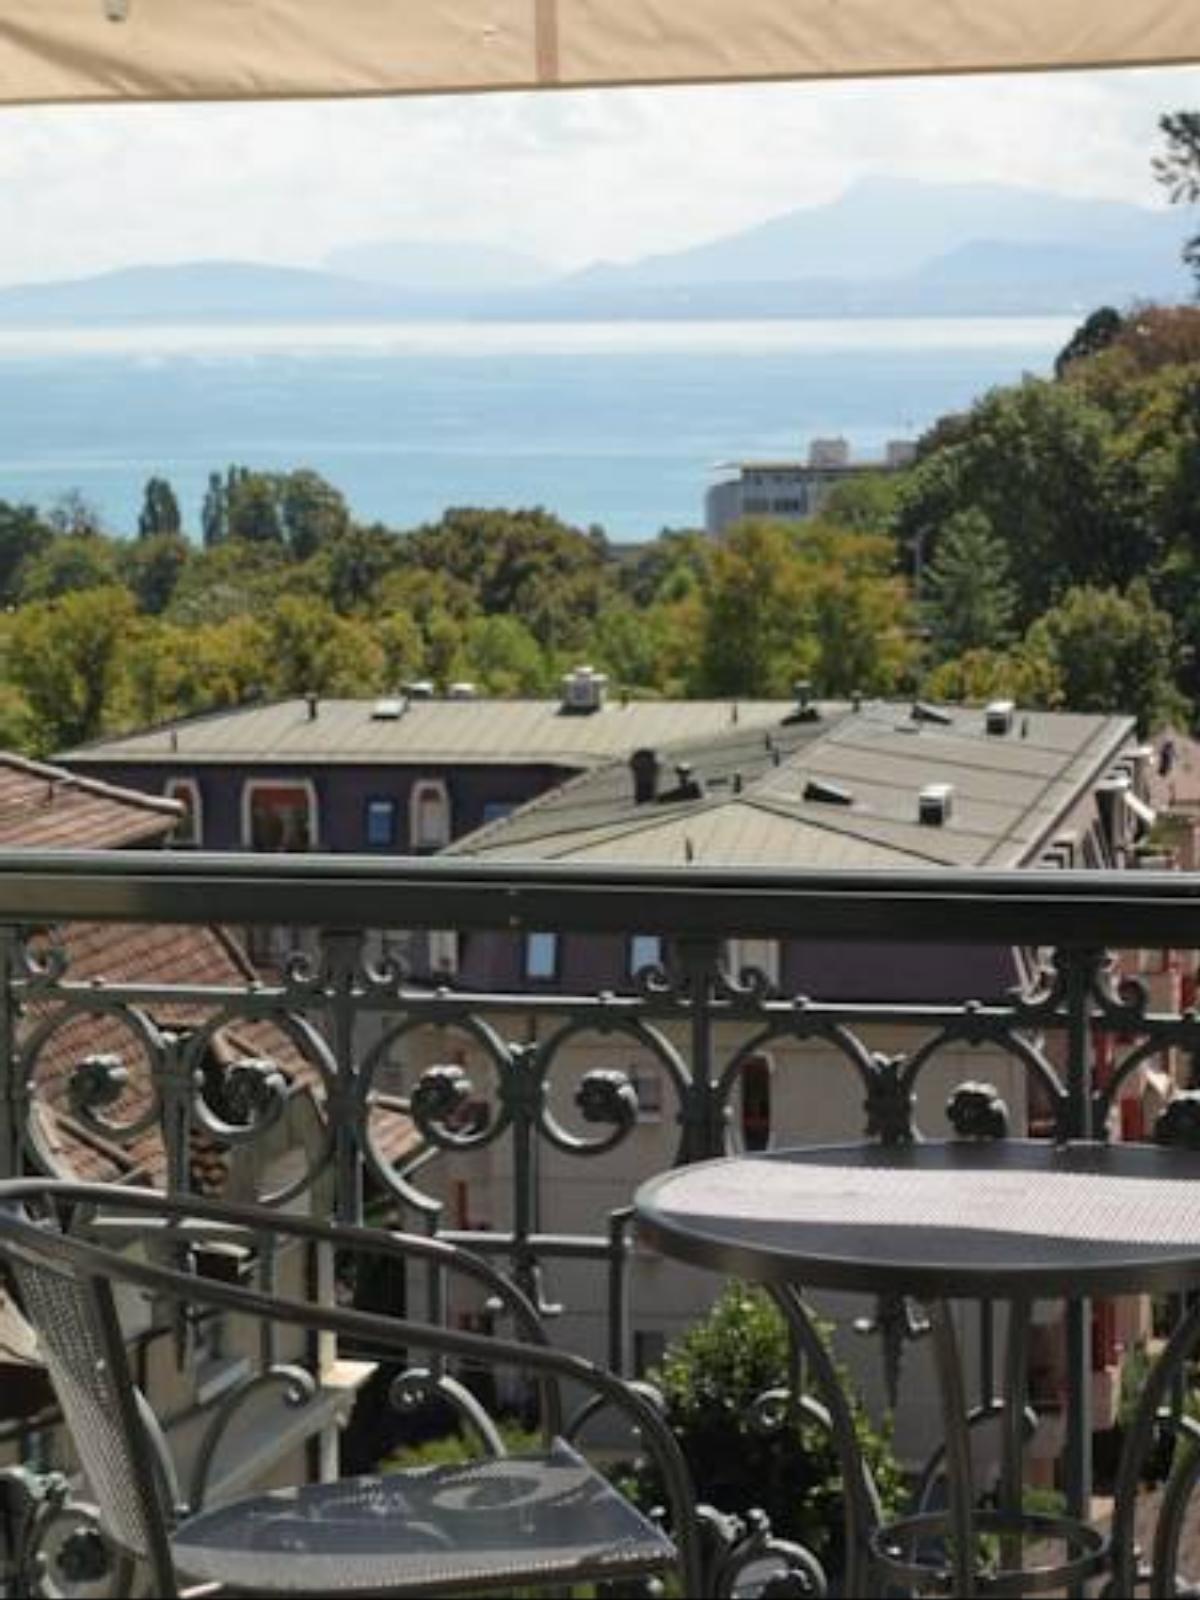 Lausanne Guesthouse & Backpacker (Check: Guesthouse City Centre) Hotel Lausanne Switzerland